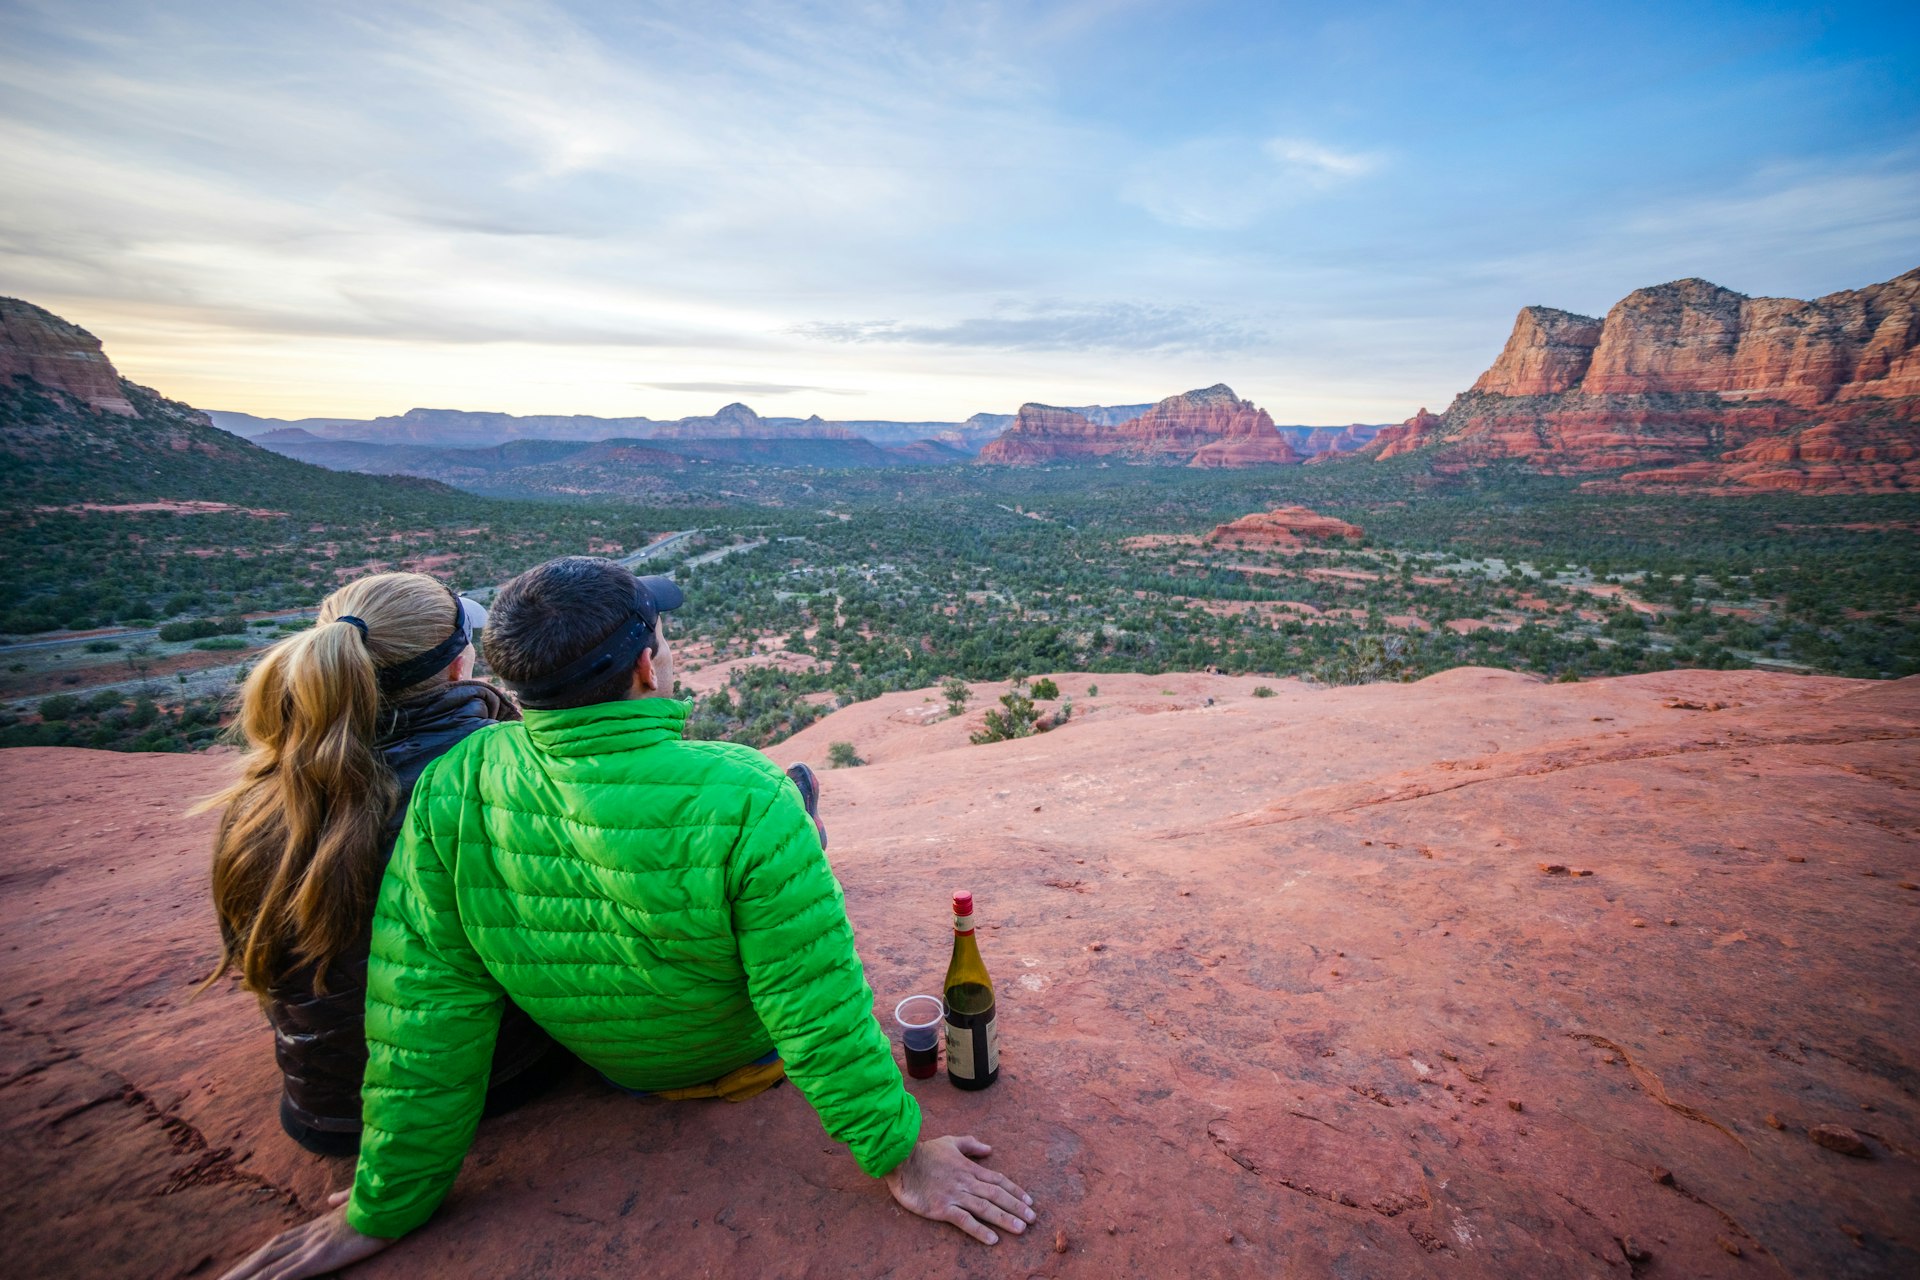 Couple watching a desert sunset with a bottle of wine in Sedona, Arizona